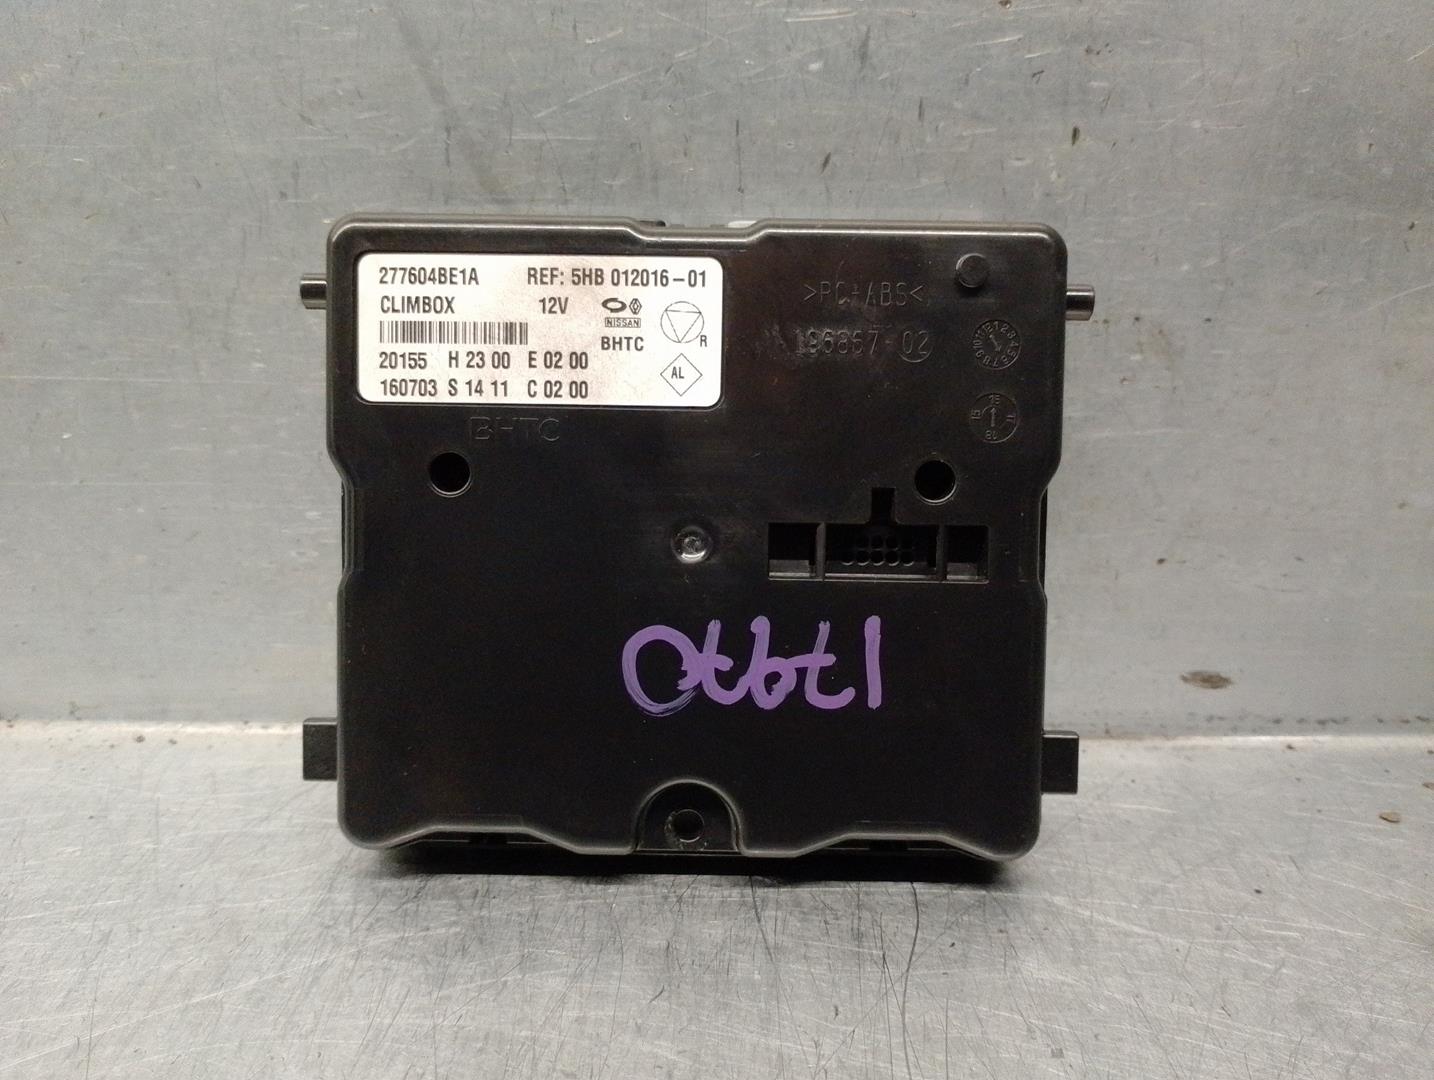 NISSAN X-Trail T32 (2013-2022) Other Control Units 277604BE1A, 5HB012016, BHTC 21134465